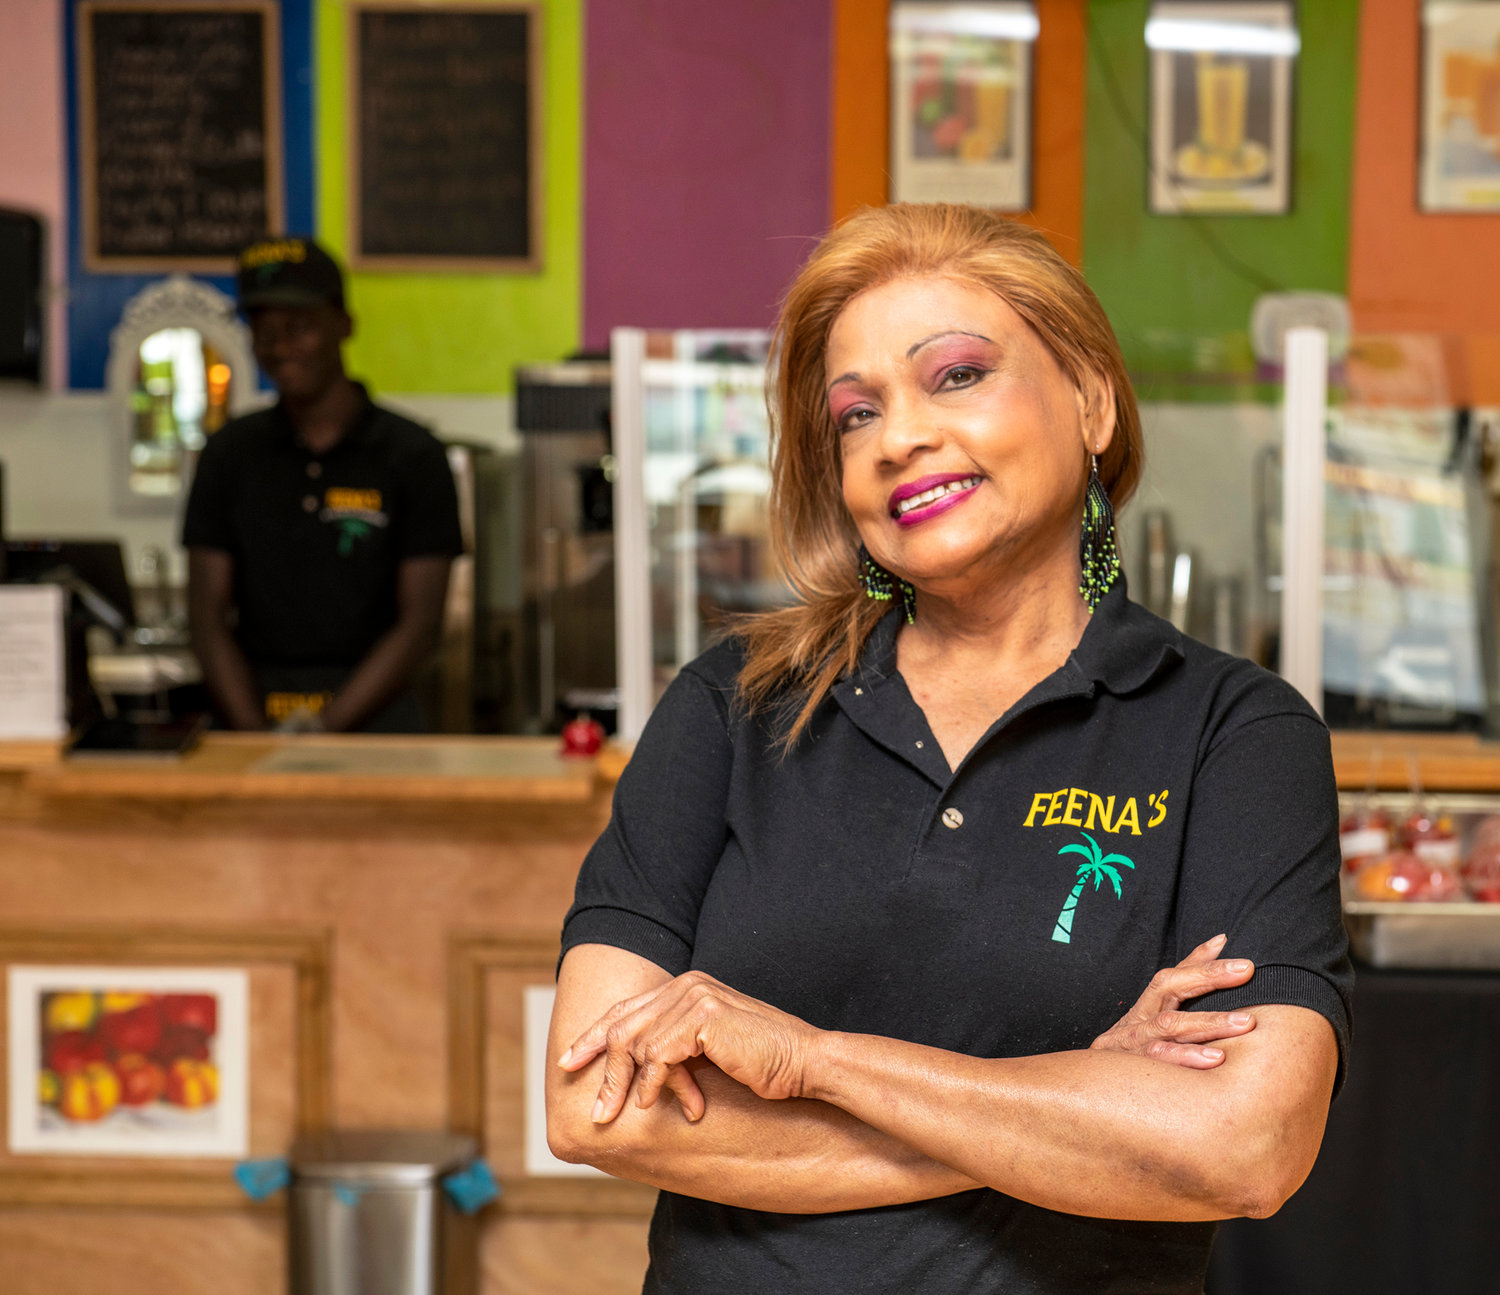 Hafeena Ali-Martinez is as colorful as the frozen treats and bright walls of her Feena’s dessert shop.